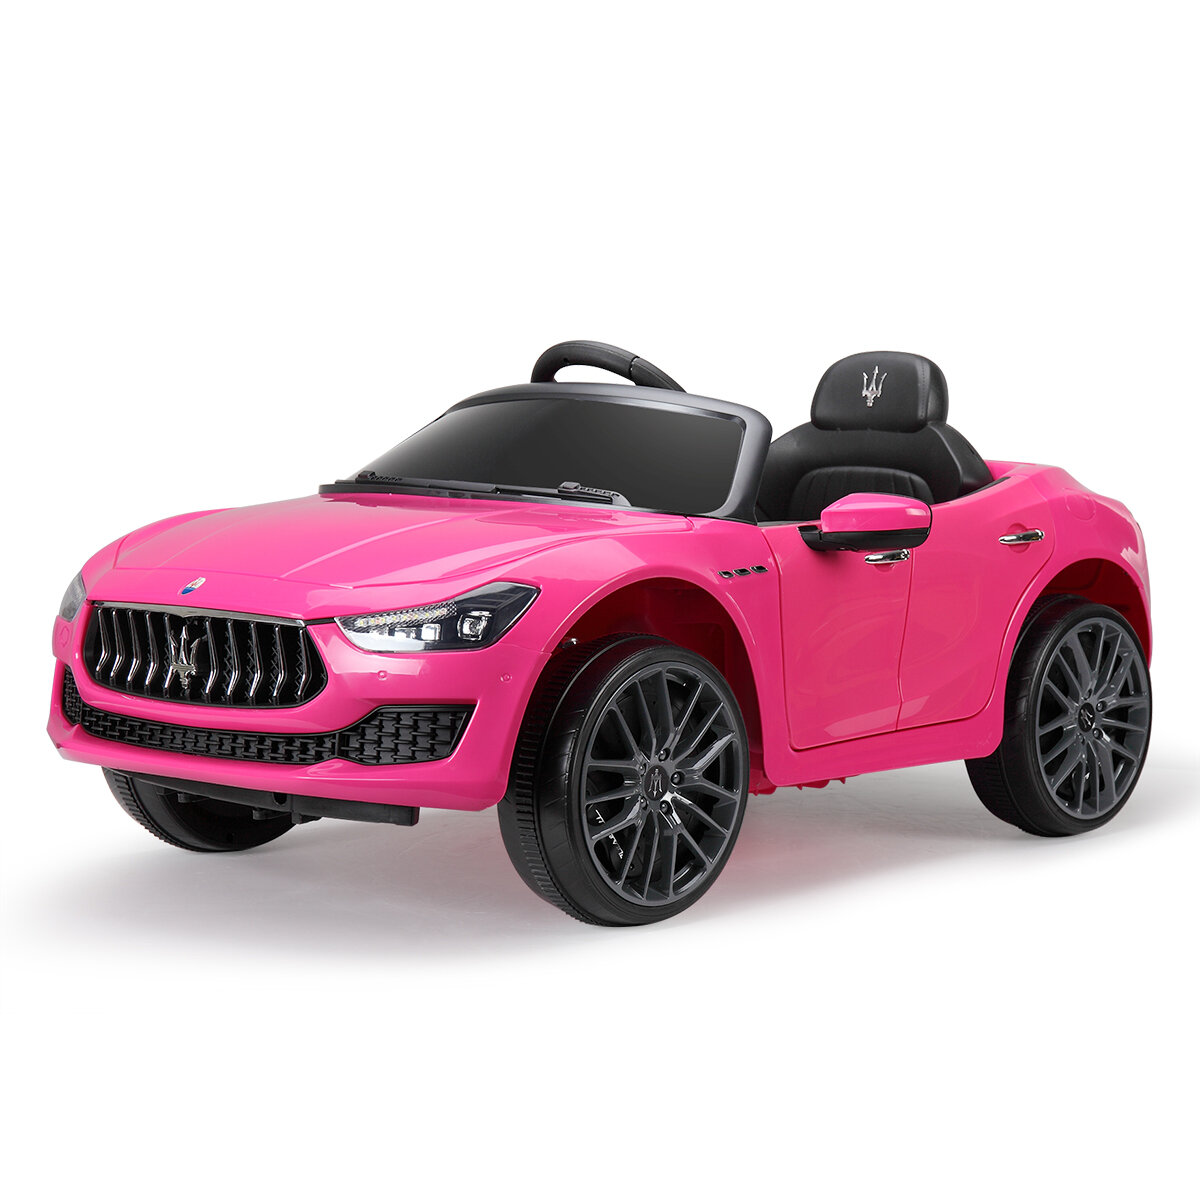 Kids Ride on Car Maserati License 12v Rechargeable With Mp3 Remote Control Black for sale online 